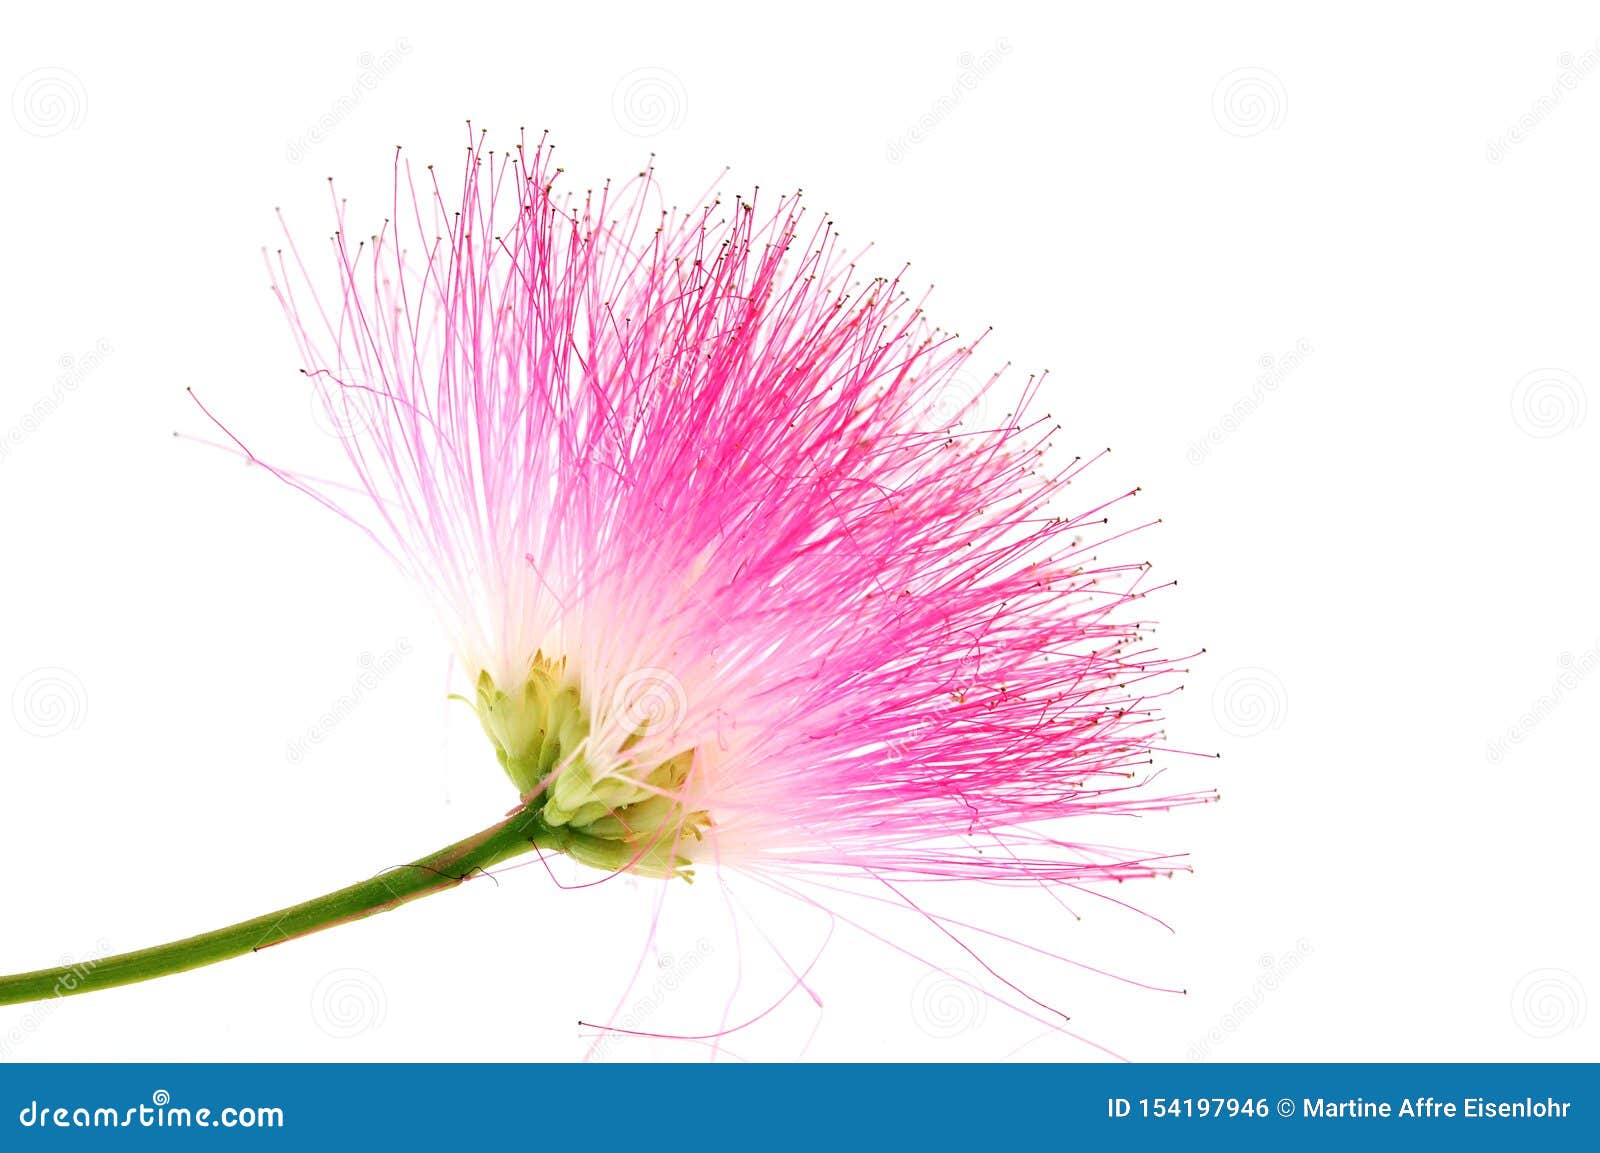 Silk Tree Albizia Julibrissin In Bloom On White Background Stock Photo Image Of Bird Butterfly